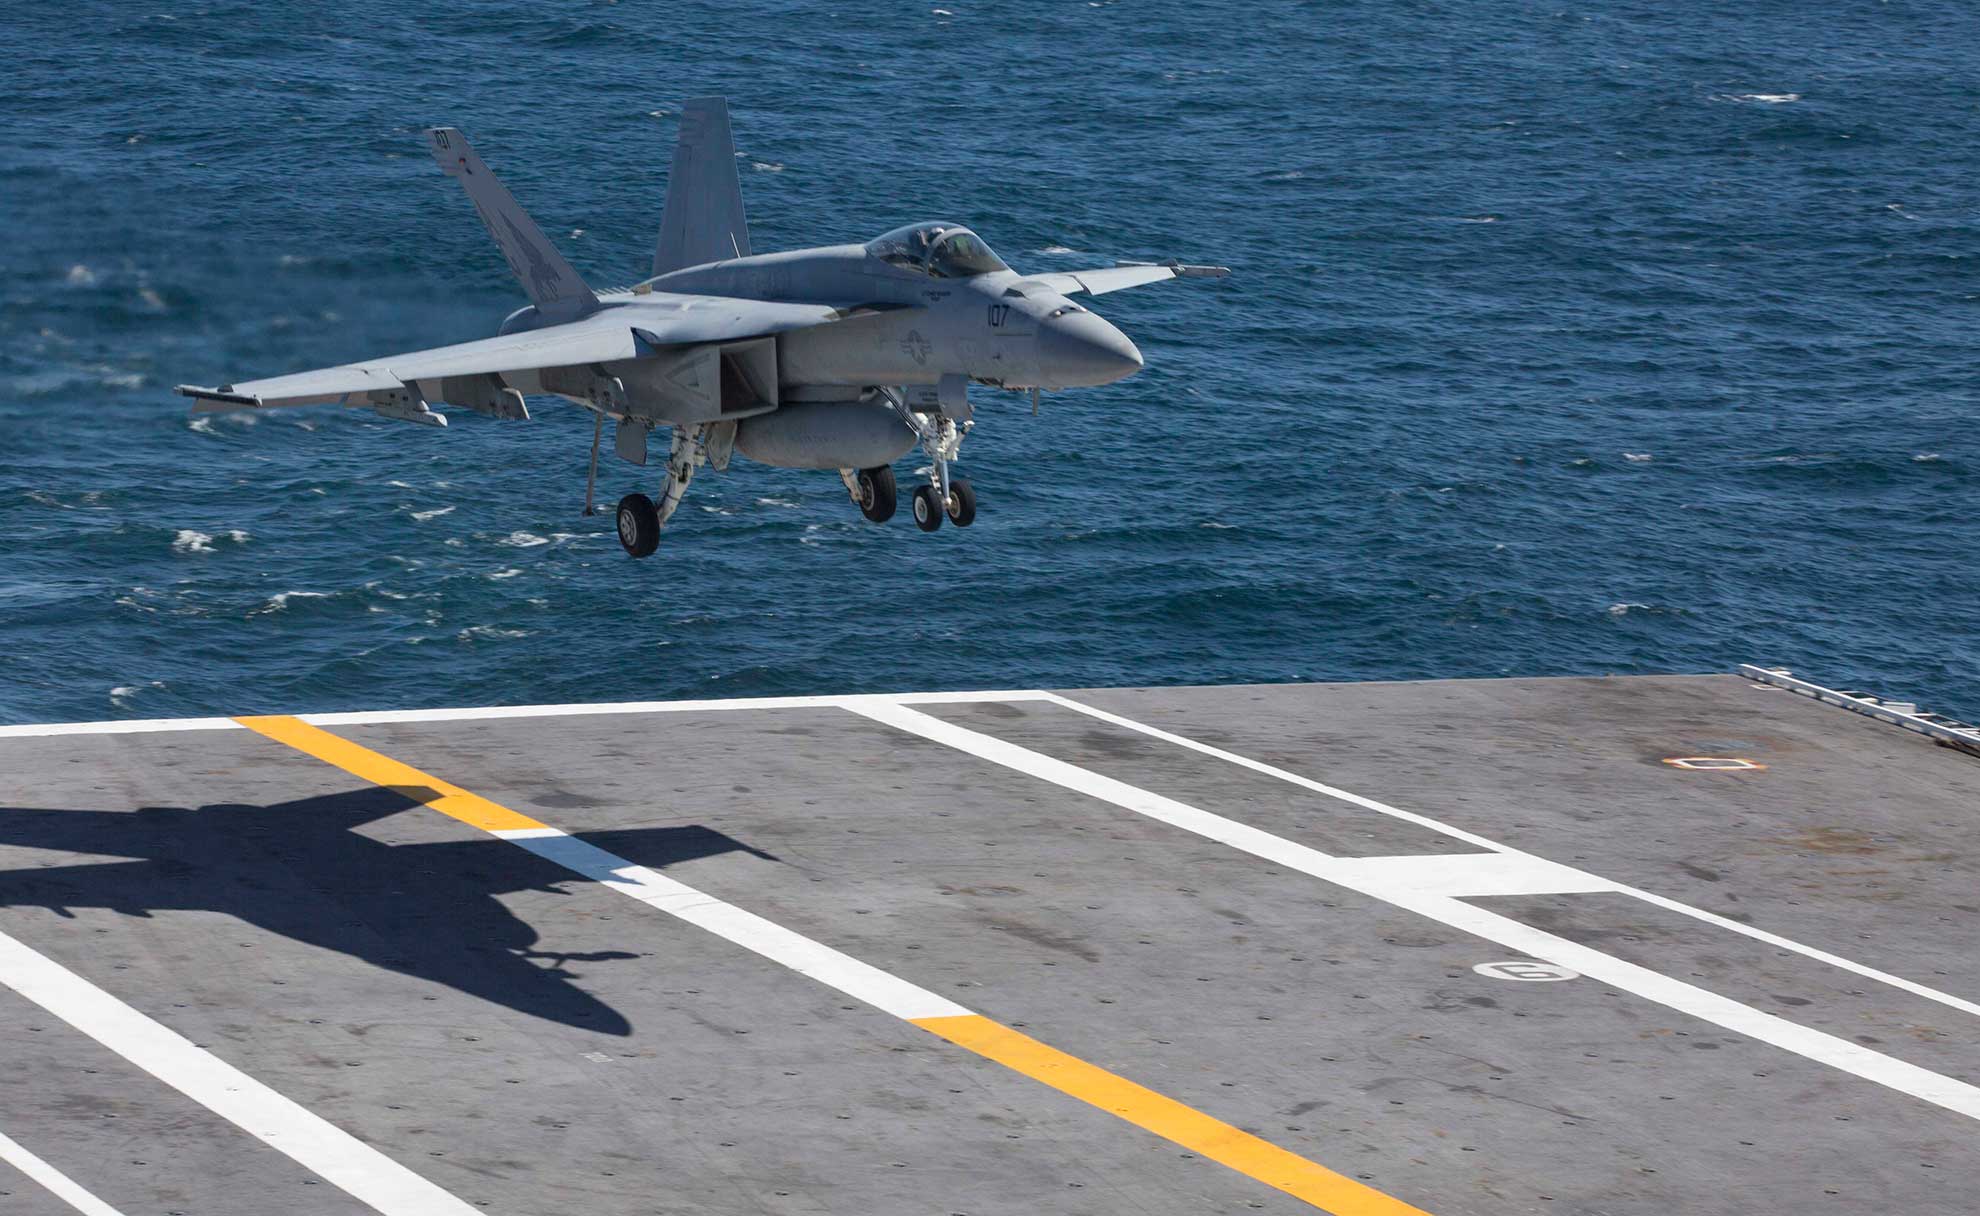 Atlantic Ocean (April 3, 2019) An F/A-18E Super Hornet from the "'Pukin' Dogs" of Strike Fighter Squadron (VFA) 143 prepares to make an arrested landing on the flight deck of the Nimitz-class aircraft carrier USS Abraham Lincoln (CVN 72. Abraham Lincoln is underway as part of the Abraham Lincoln Carrier Strike Group deployment in support of maritime security cooperation efforts in the U.S. 5th, 6th and 7th Fleet areas of responsibility. With Abraham Lincoln as the flagship, deployed strike group assets include staffs, ships and aircraft of Carrier Strike Group (CSG) 12, Destroyer Squadron (DESRON) 2, the guided-missile cruiser USS Leyte Gulf (CG 55) and Carrier Air Wing (CVW) 7; as well as the Spanish navy Alvaro de Bazan-class frigate ESPS Mendez Nuñez (F 104) -- U.S. Navy photo by MCS Seaman Tristan Kyle Labuguen. -